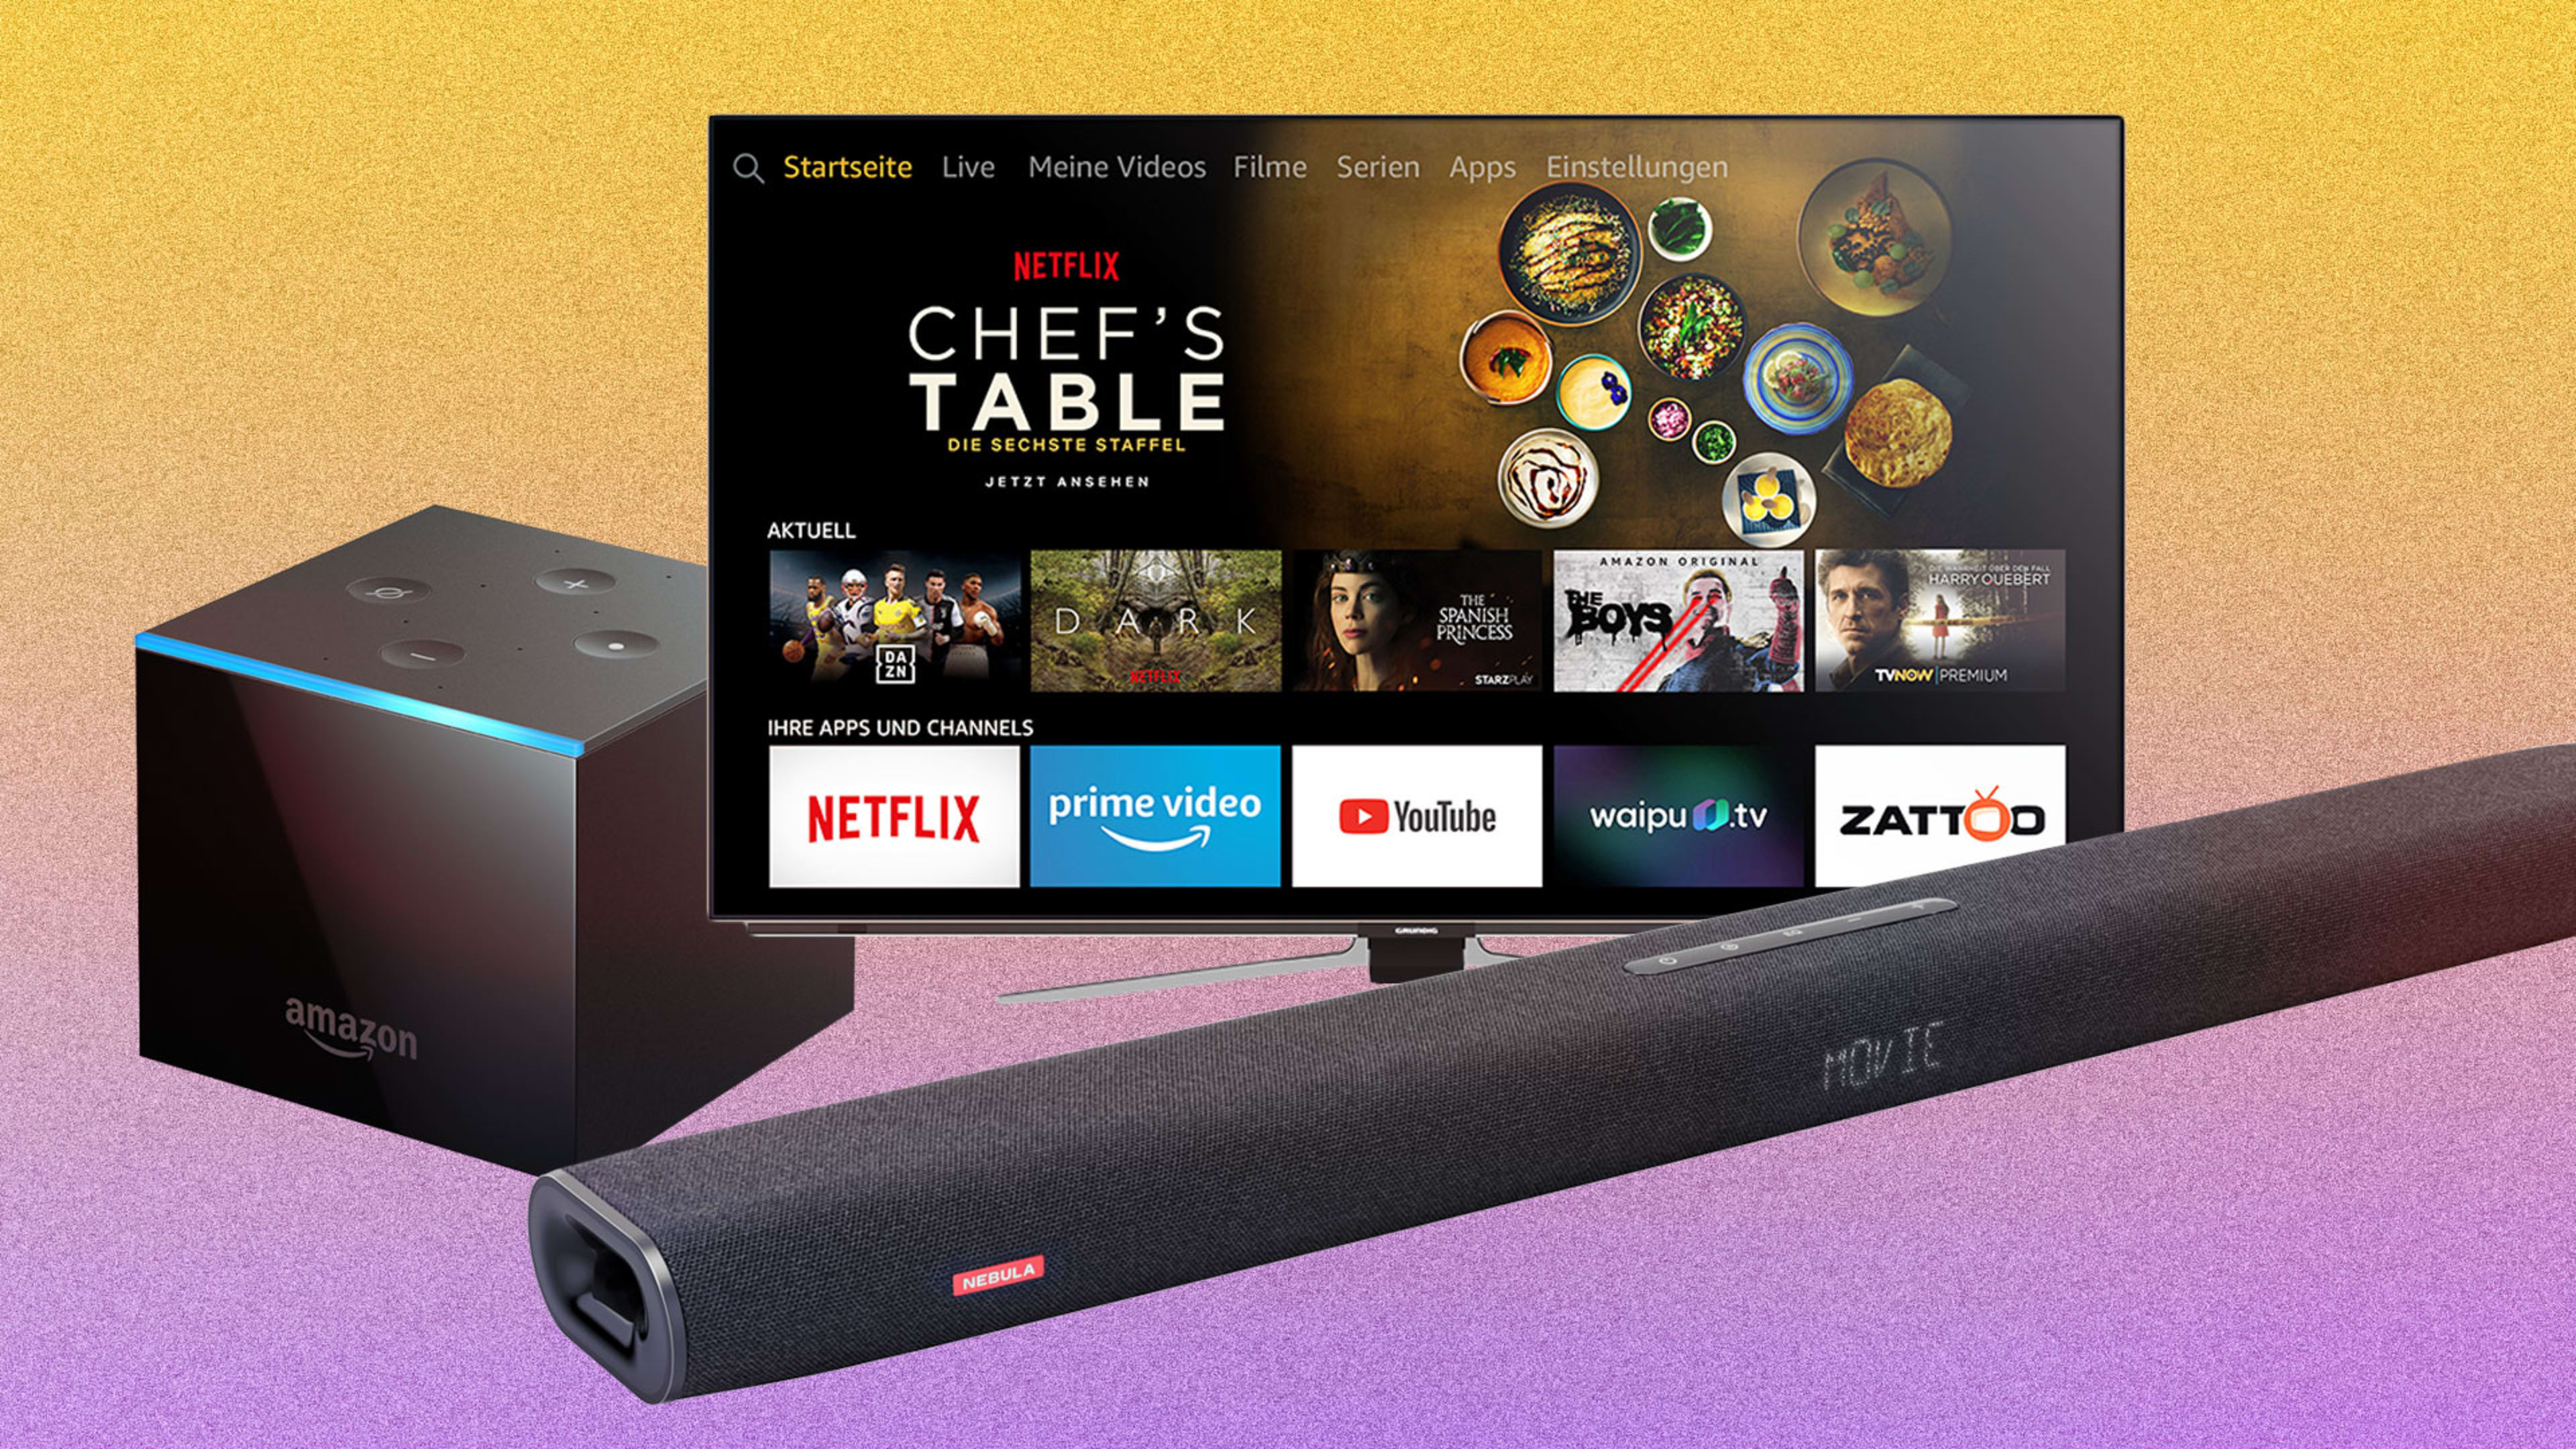 Amazon Fire TV is quietly overtaking Roku, and here’s how